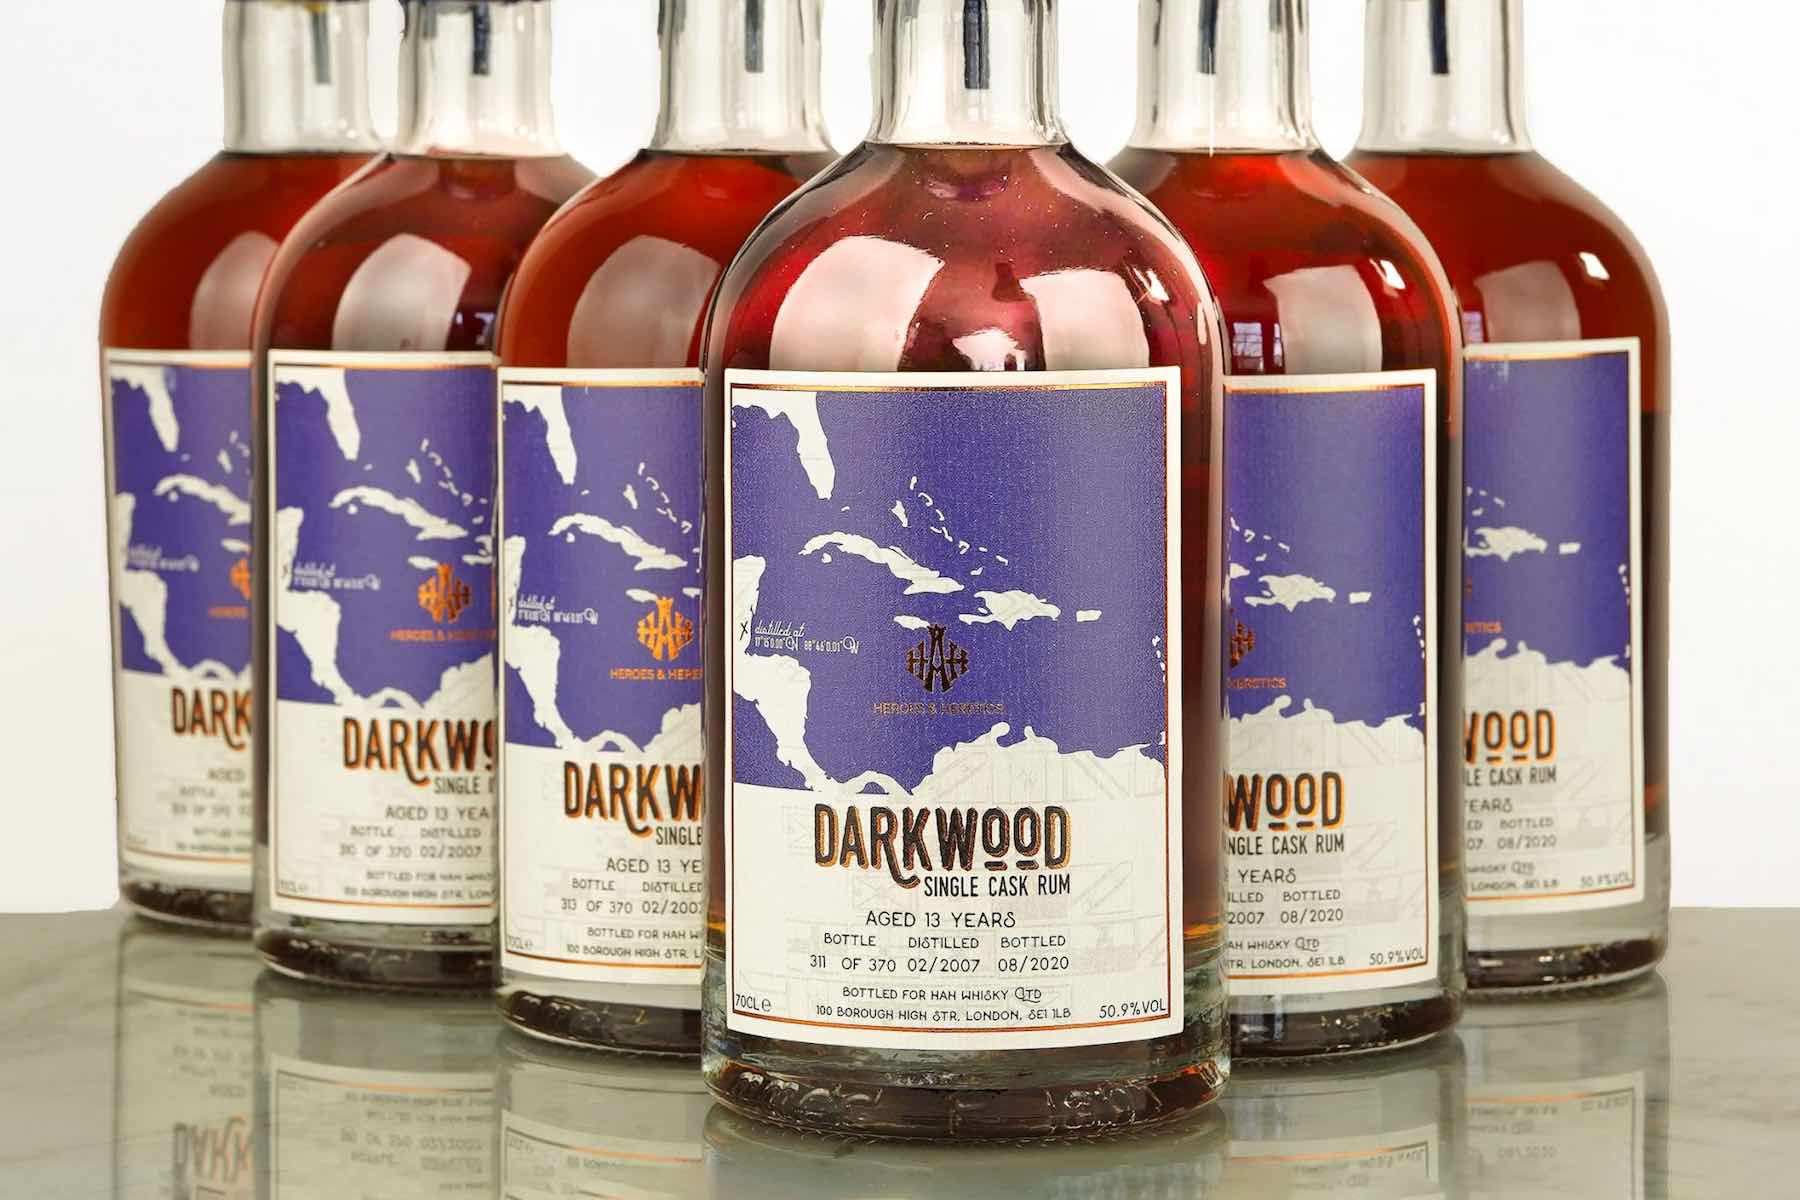 Heroes and Heretics Darkwood 13 Year Old Belize Rum Review and Tasting Notes